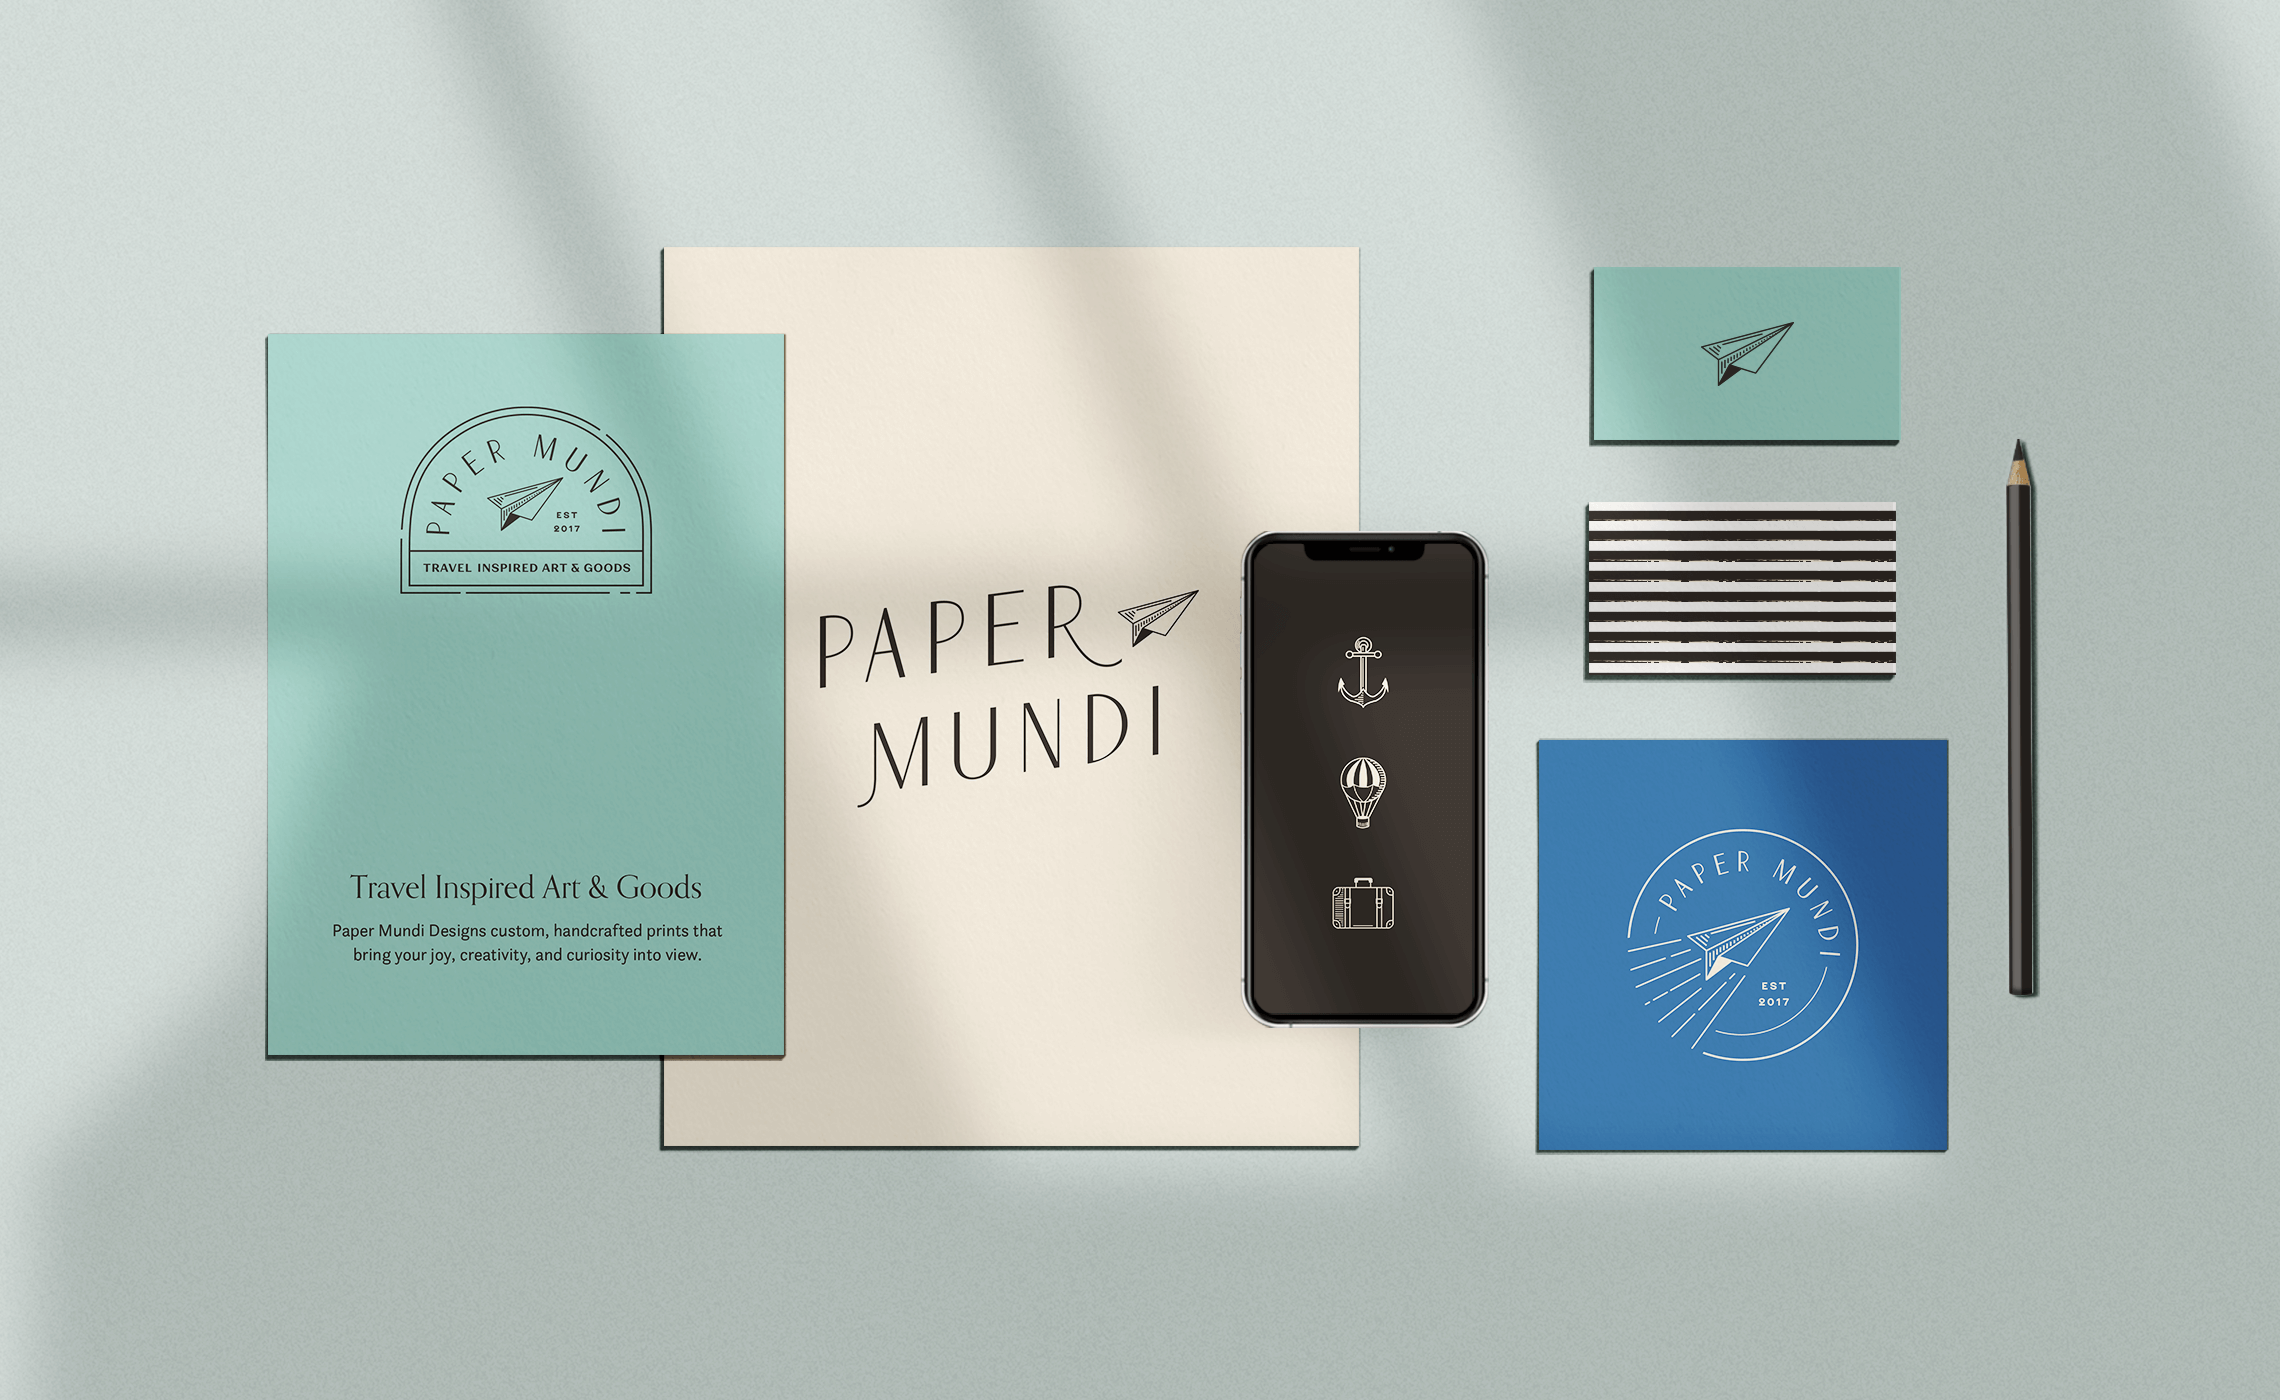 Gorgeous Print & Packaging Design Collection - August 2017